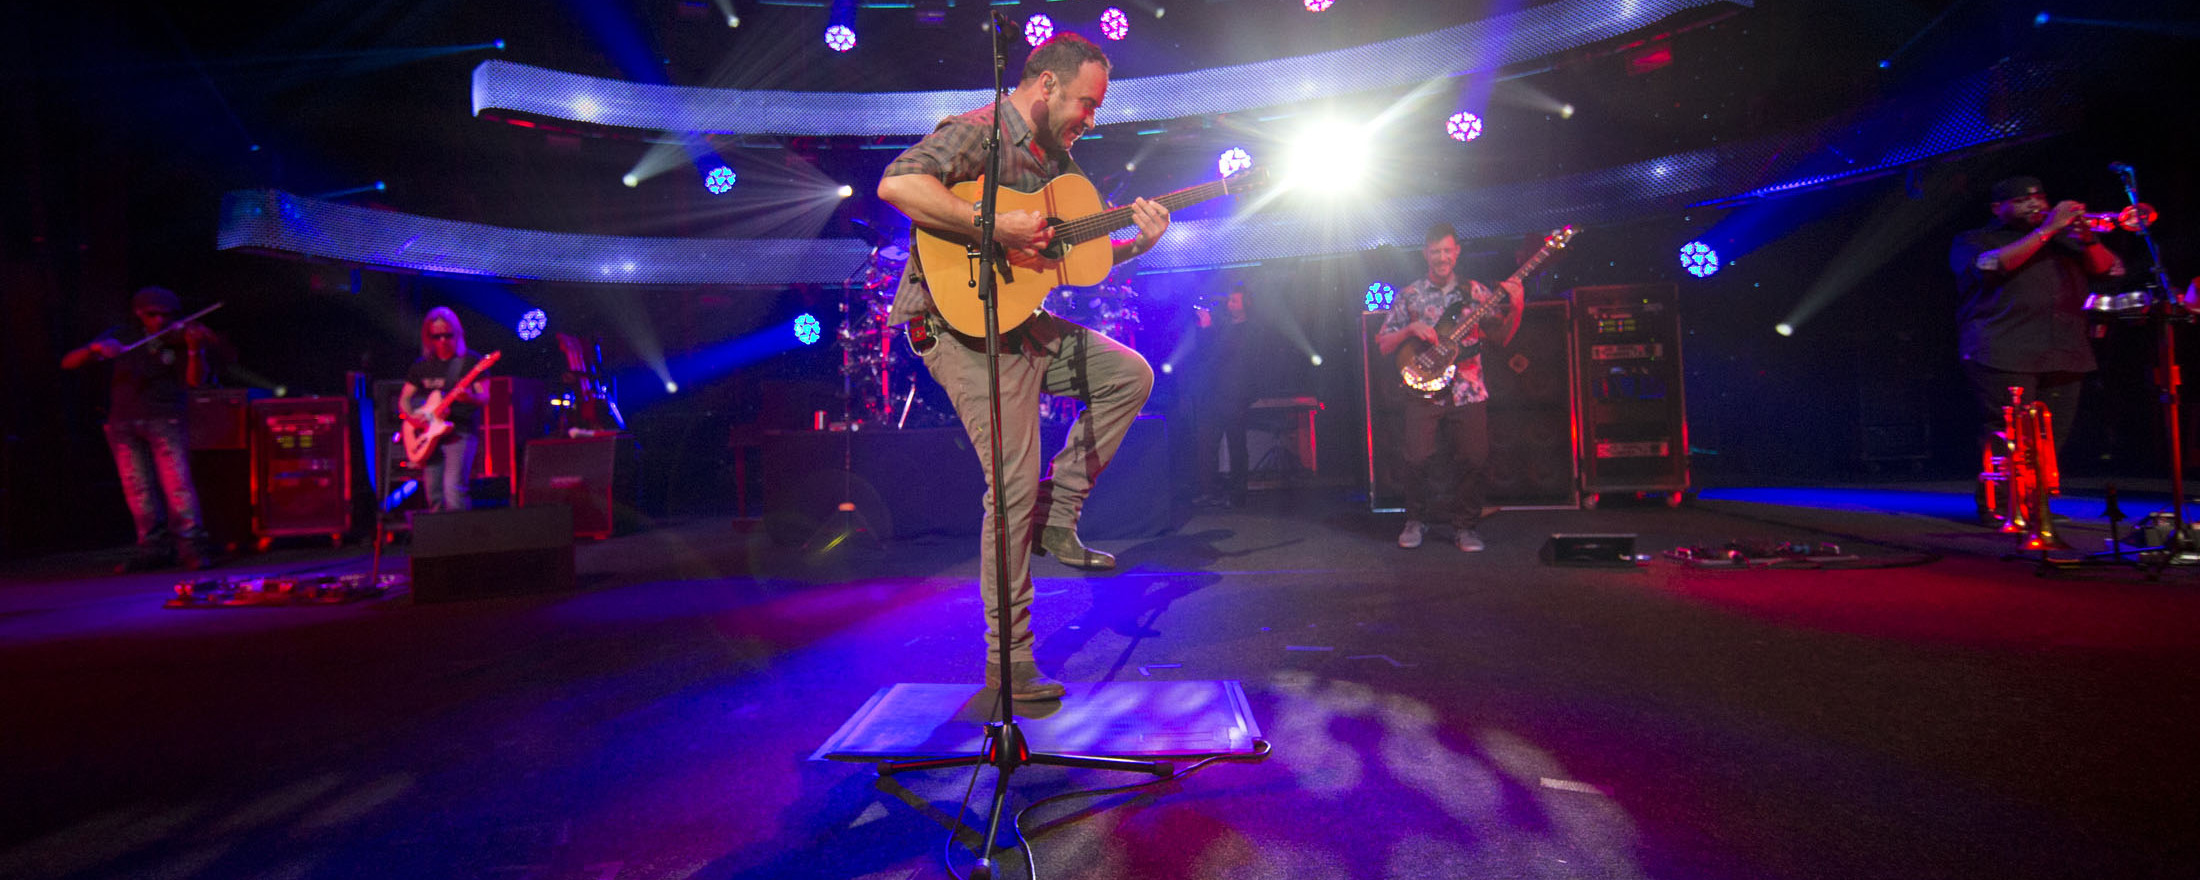 Dave Matthews playing guitar on stage with one leg in the air